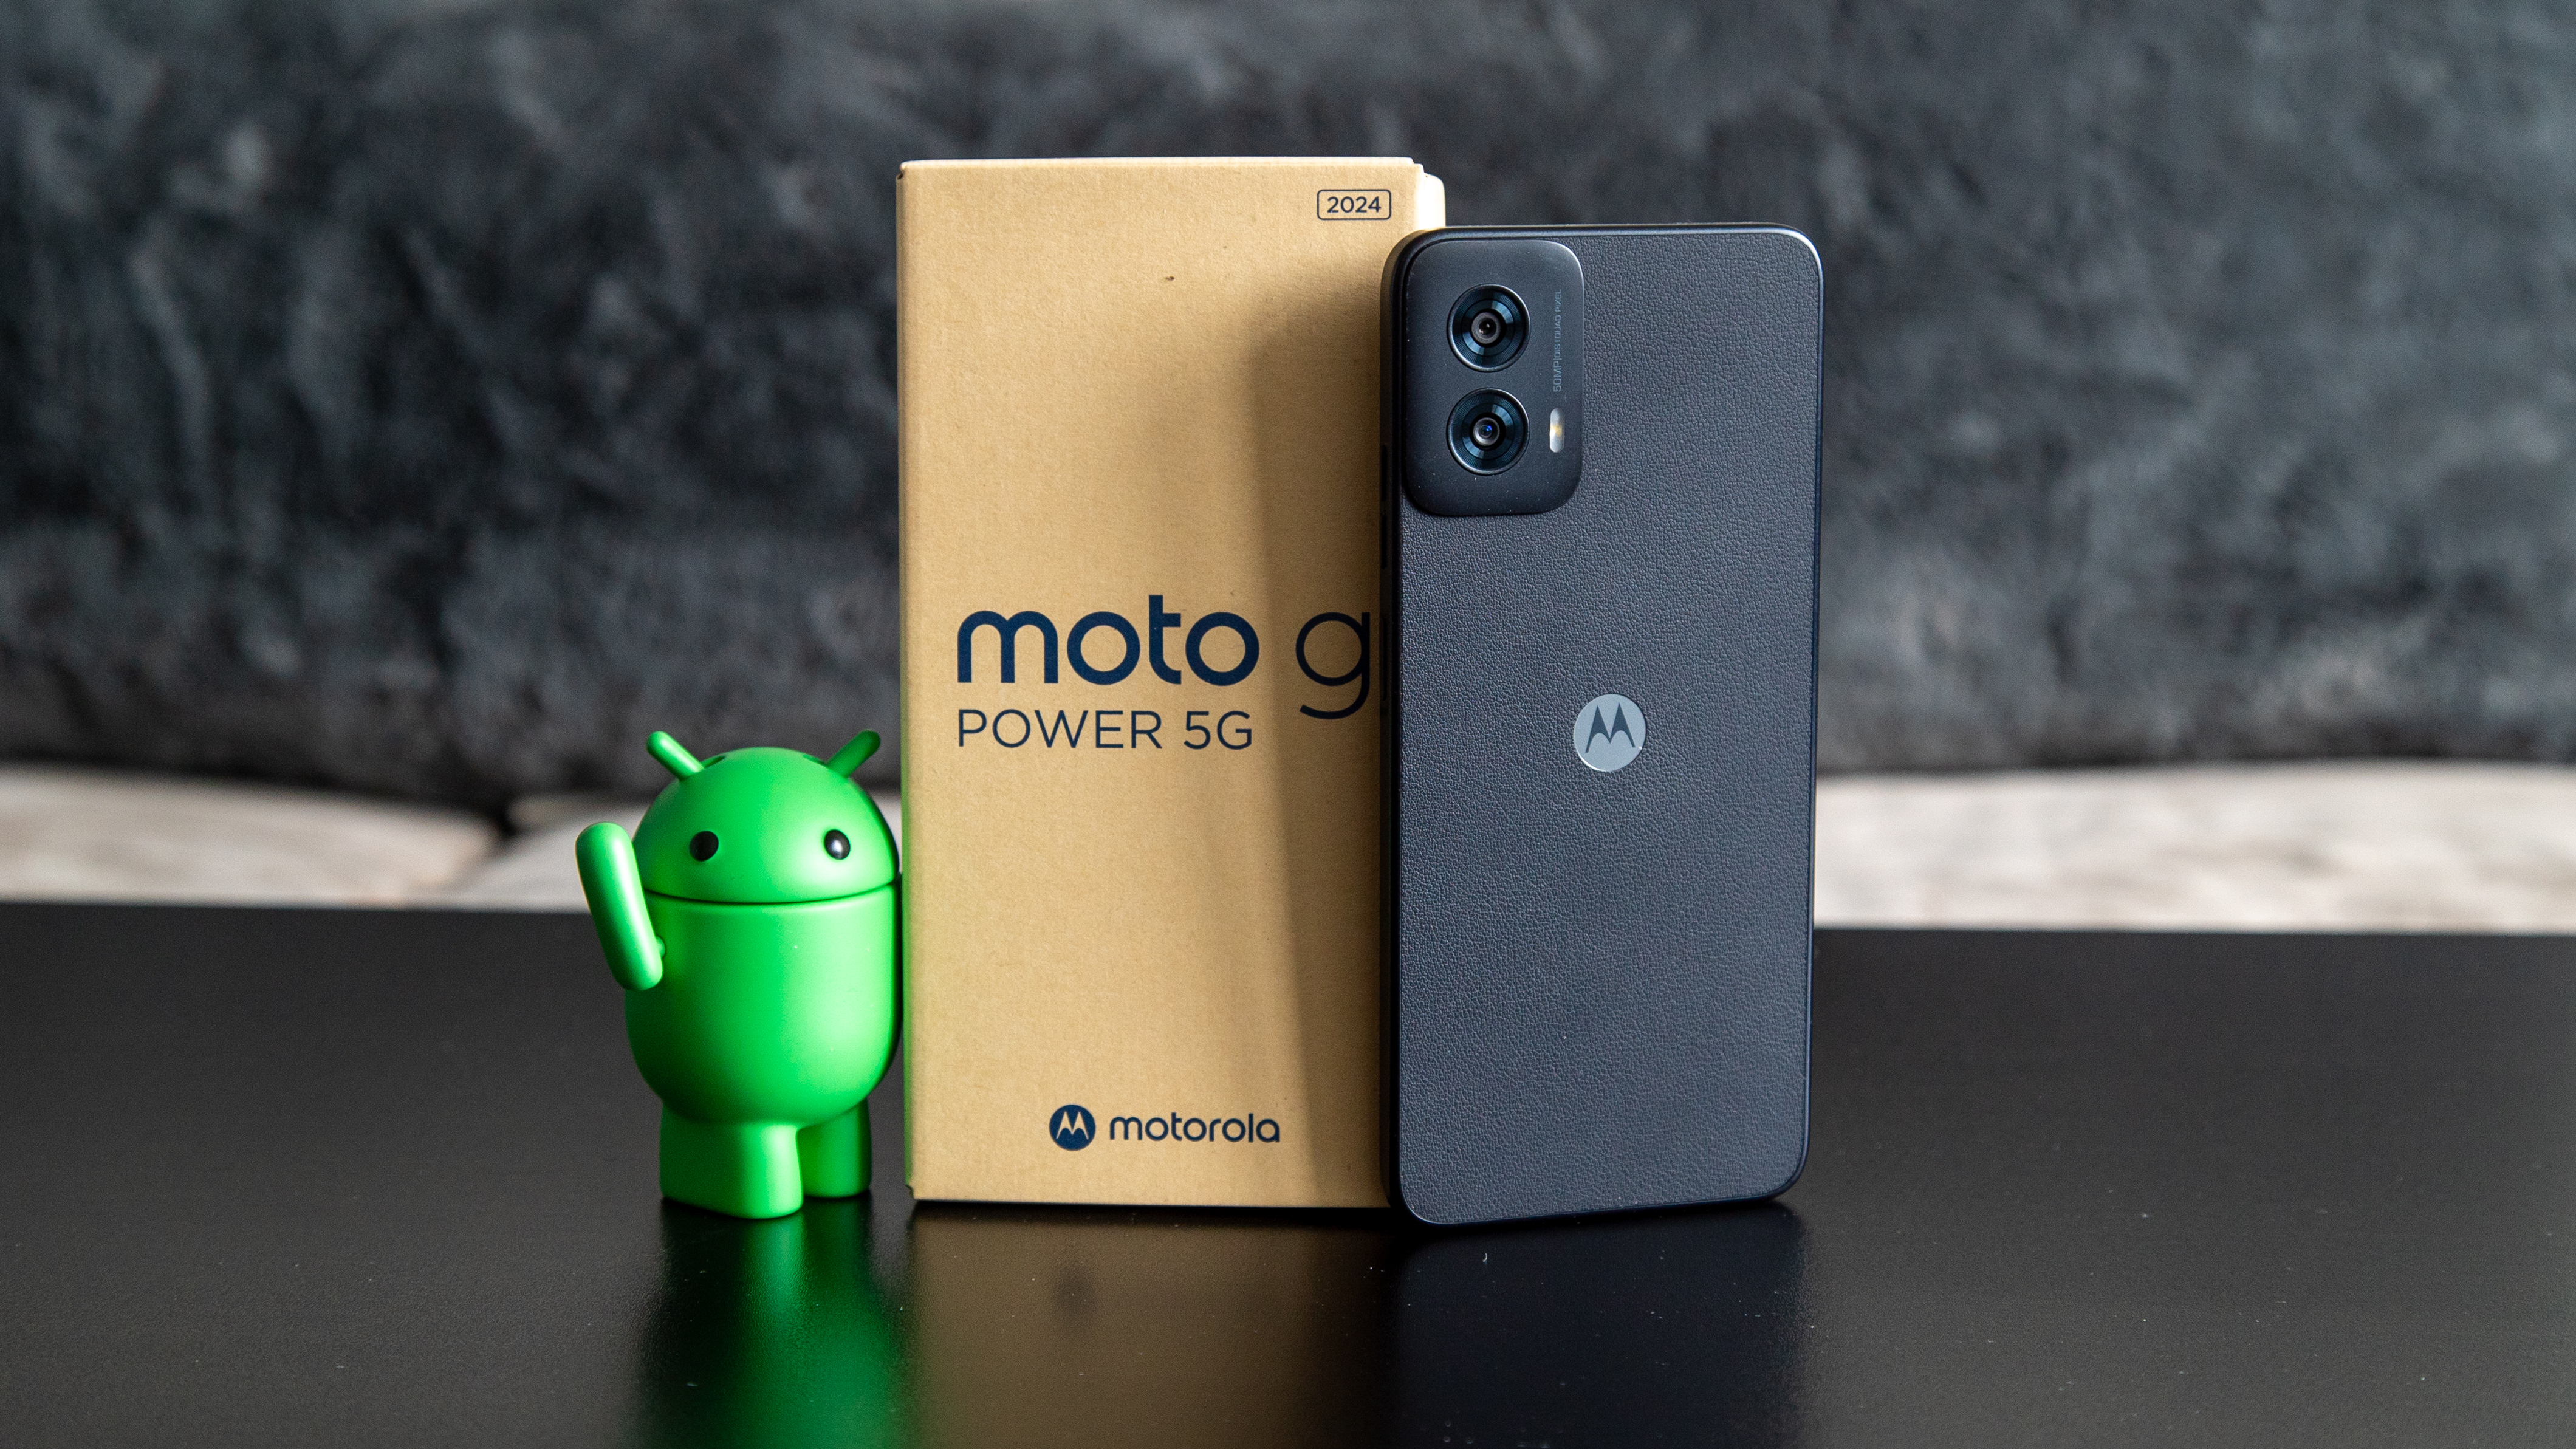 The Moto G Power 5G 2024 retail box with Google's 